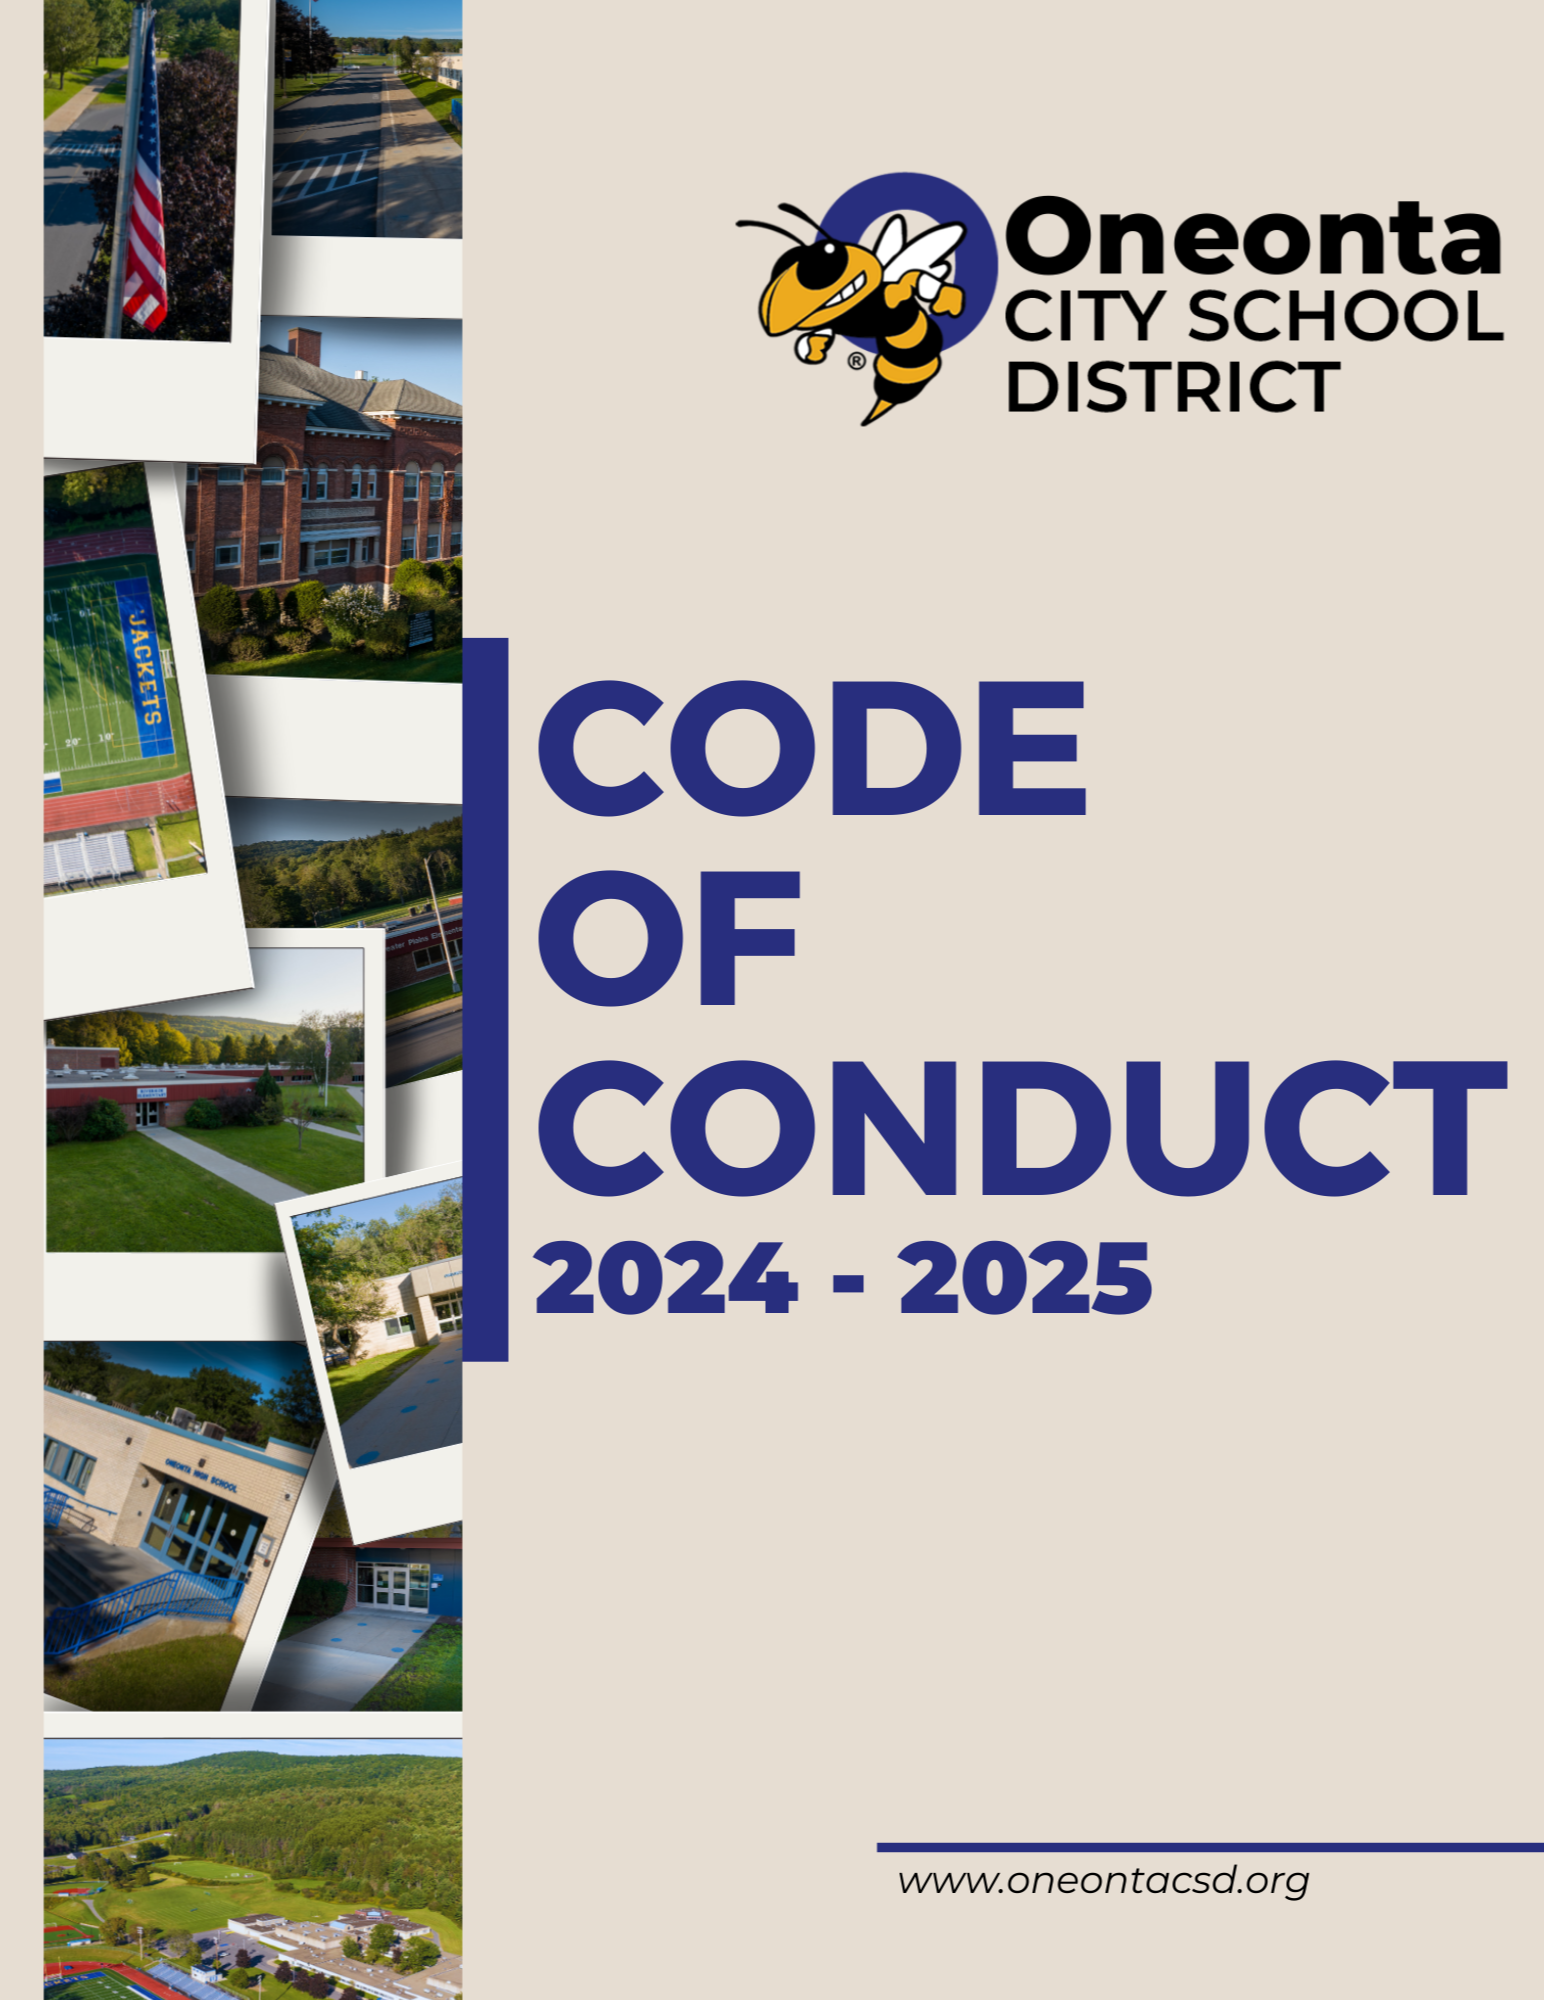 Blue words on tan background that reads  "Code of Conduct 2023-2024"